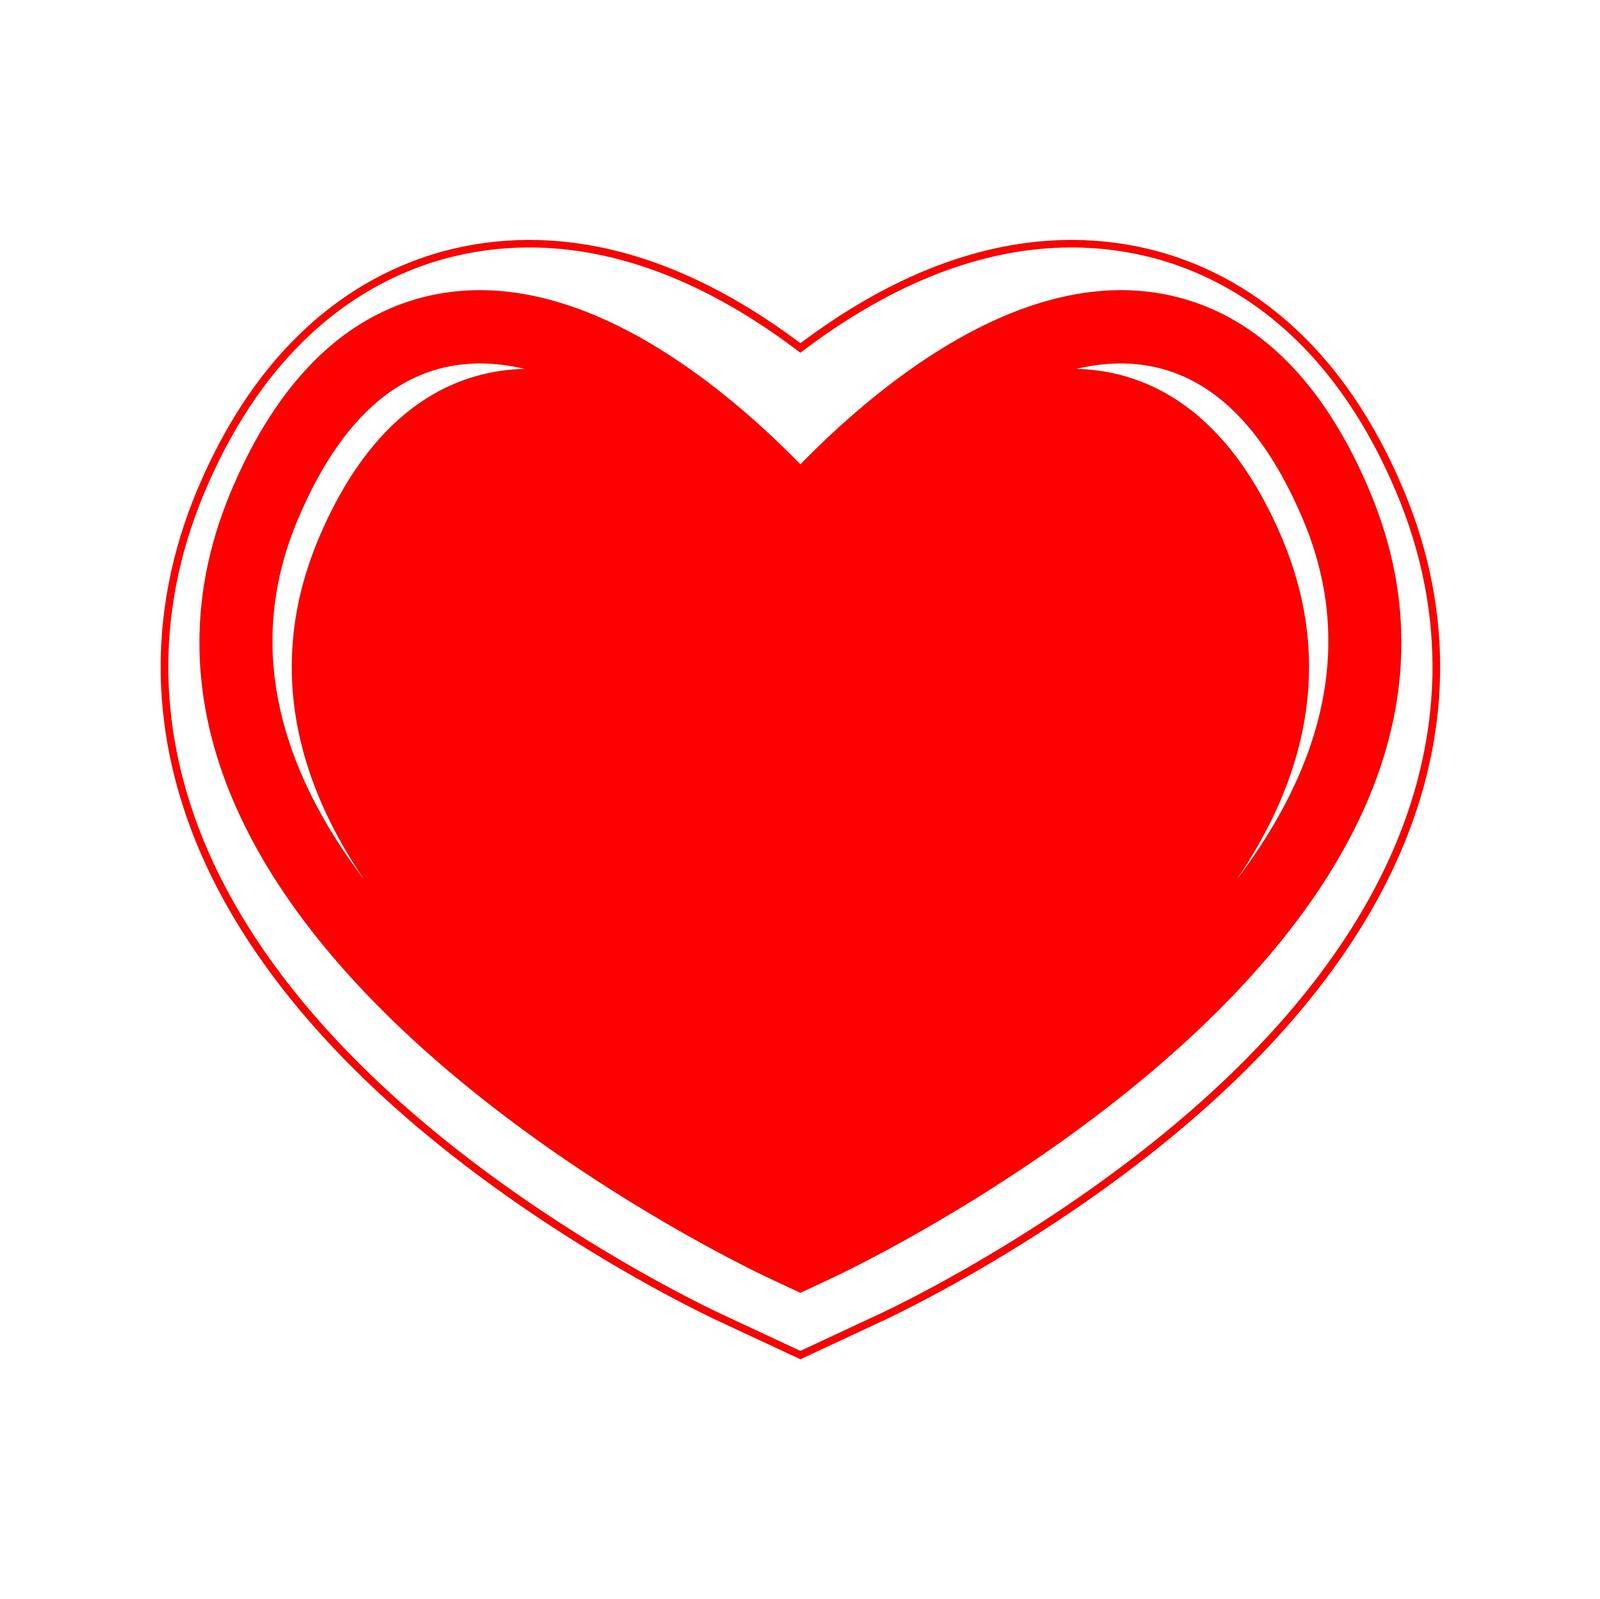 Red shaped symbolic heart for Valentine's Day by Infobond